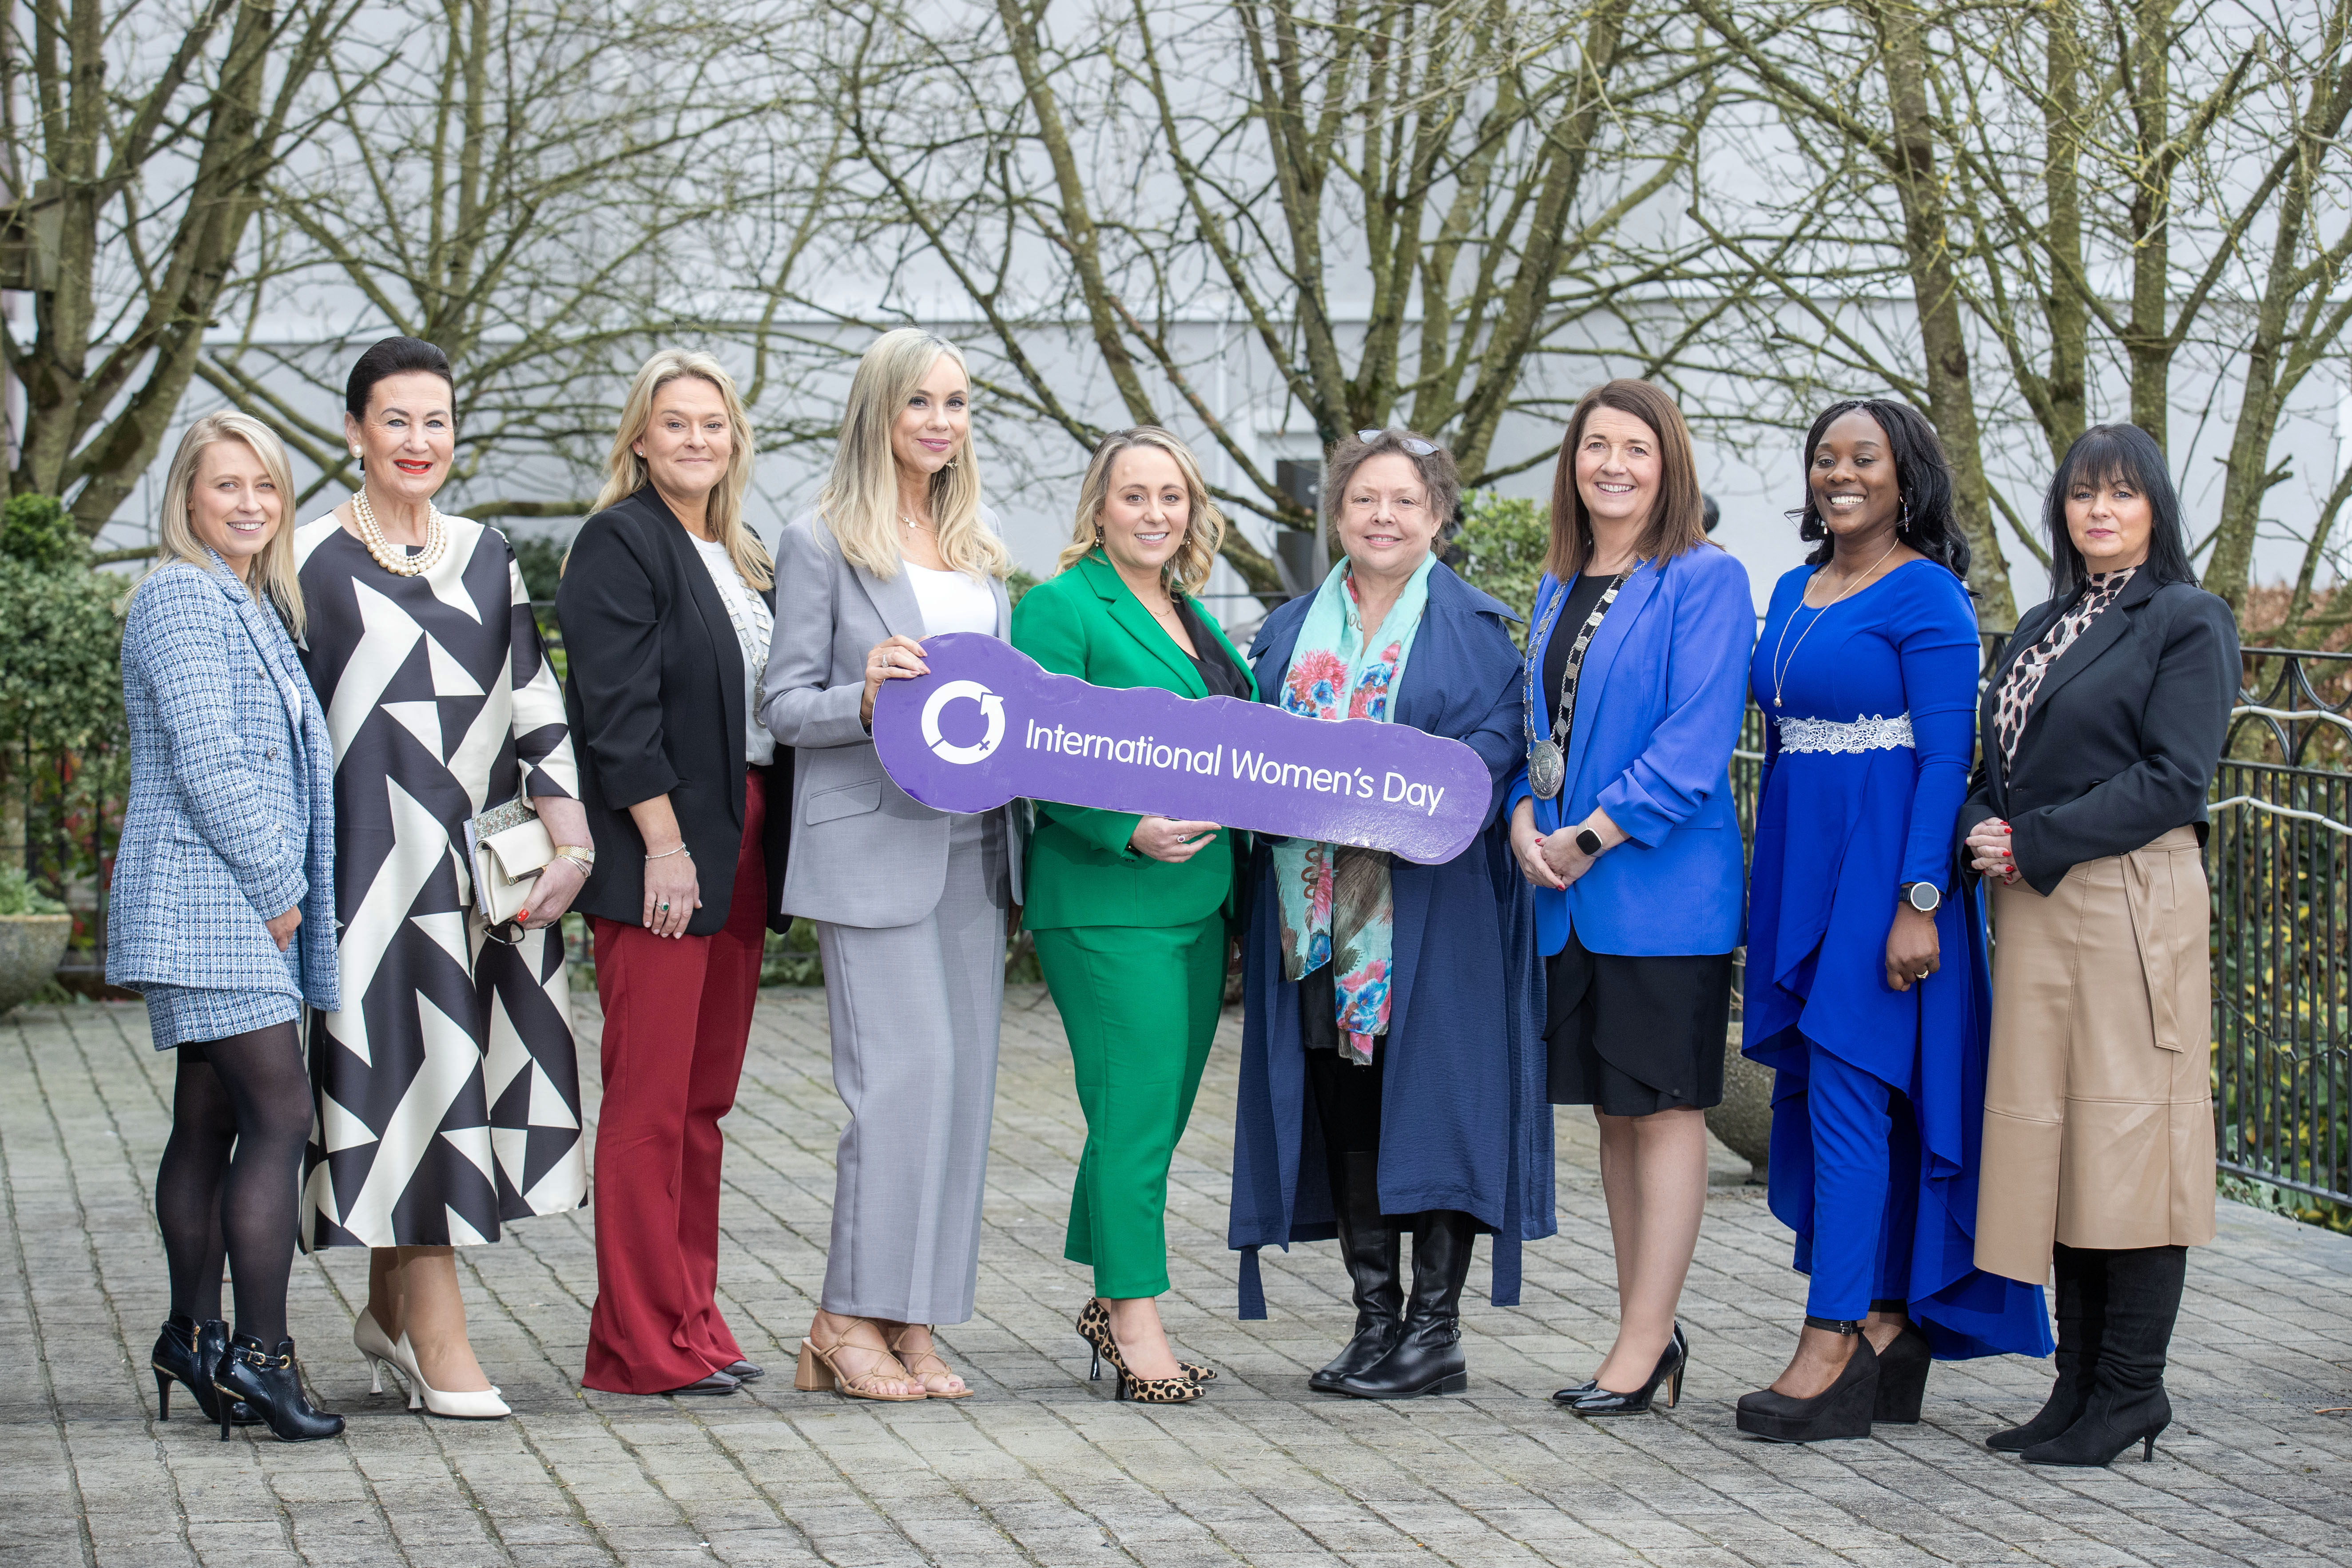 Over 150 female leaders gather to “Inspire Inclusion” with spotlight on International Women's Day 